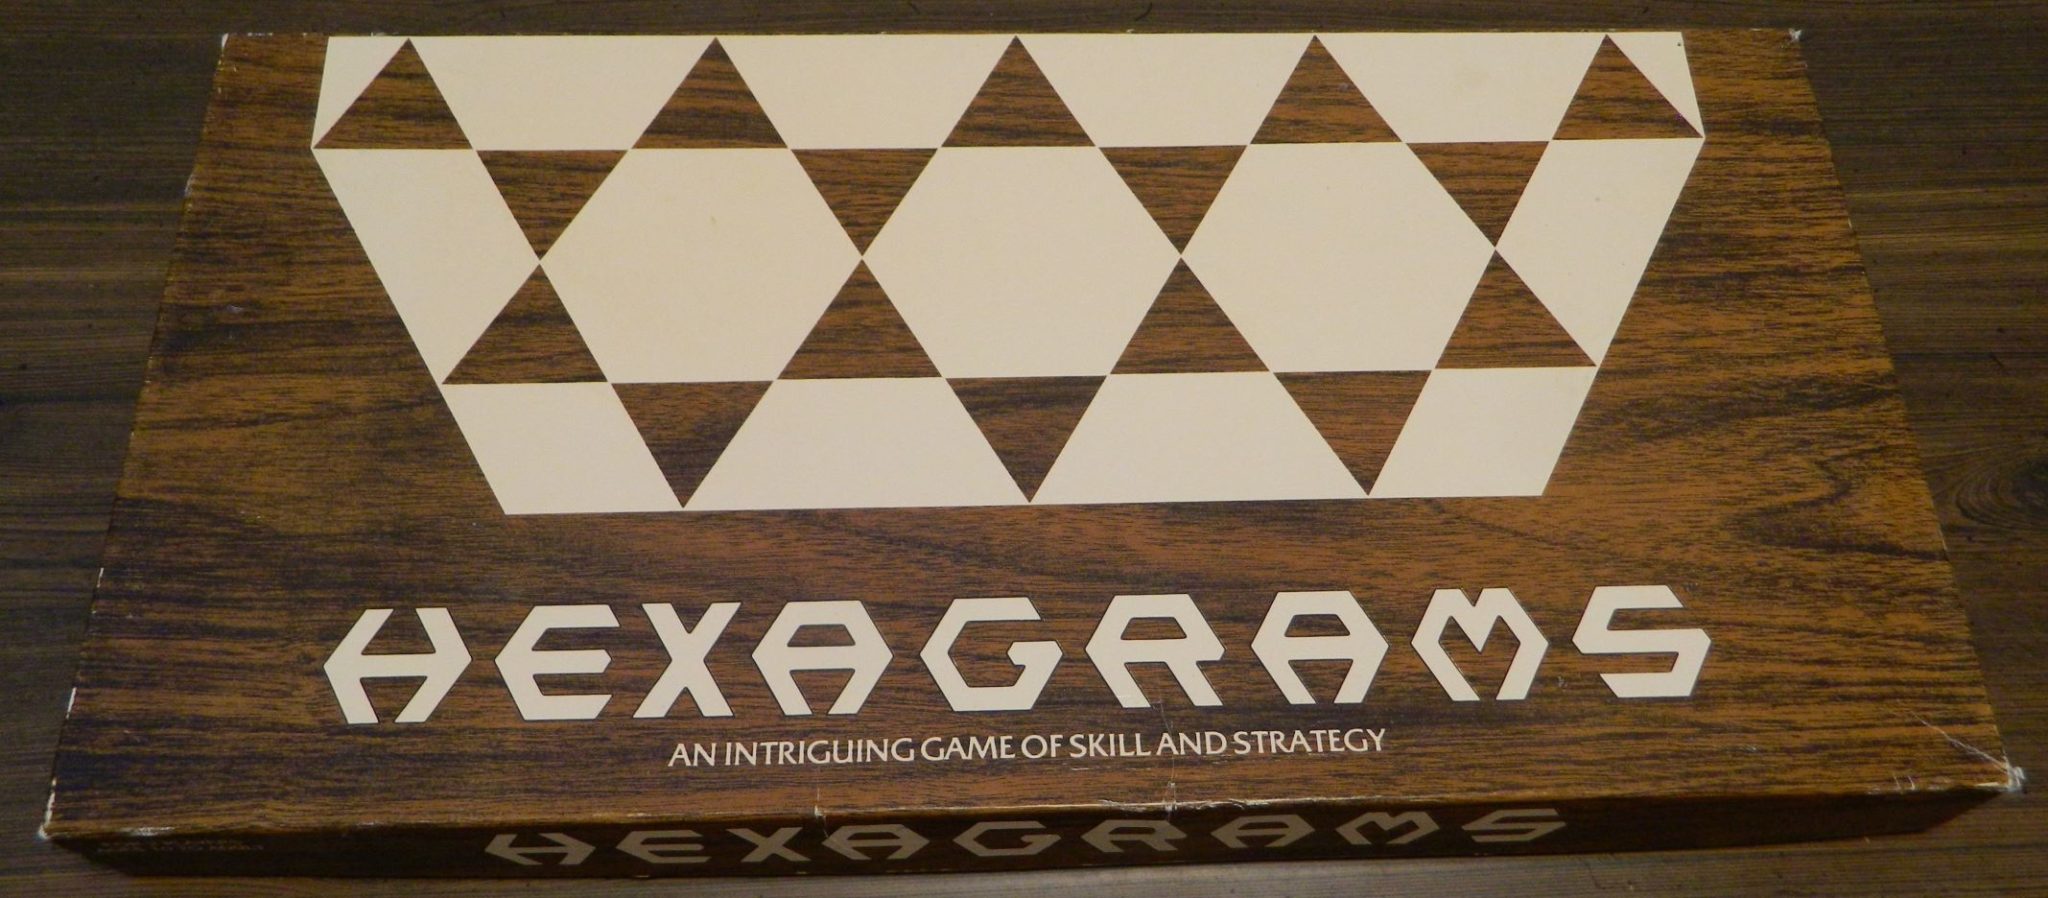 Hexagrams Board Game Review and Rules